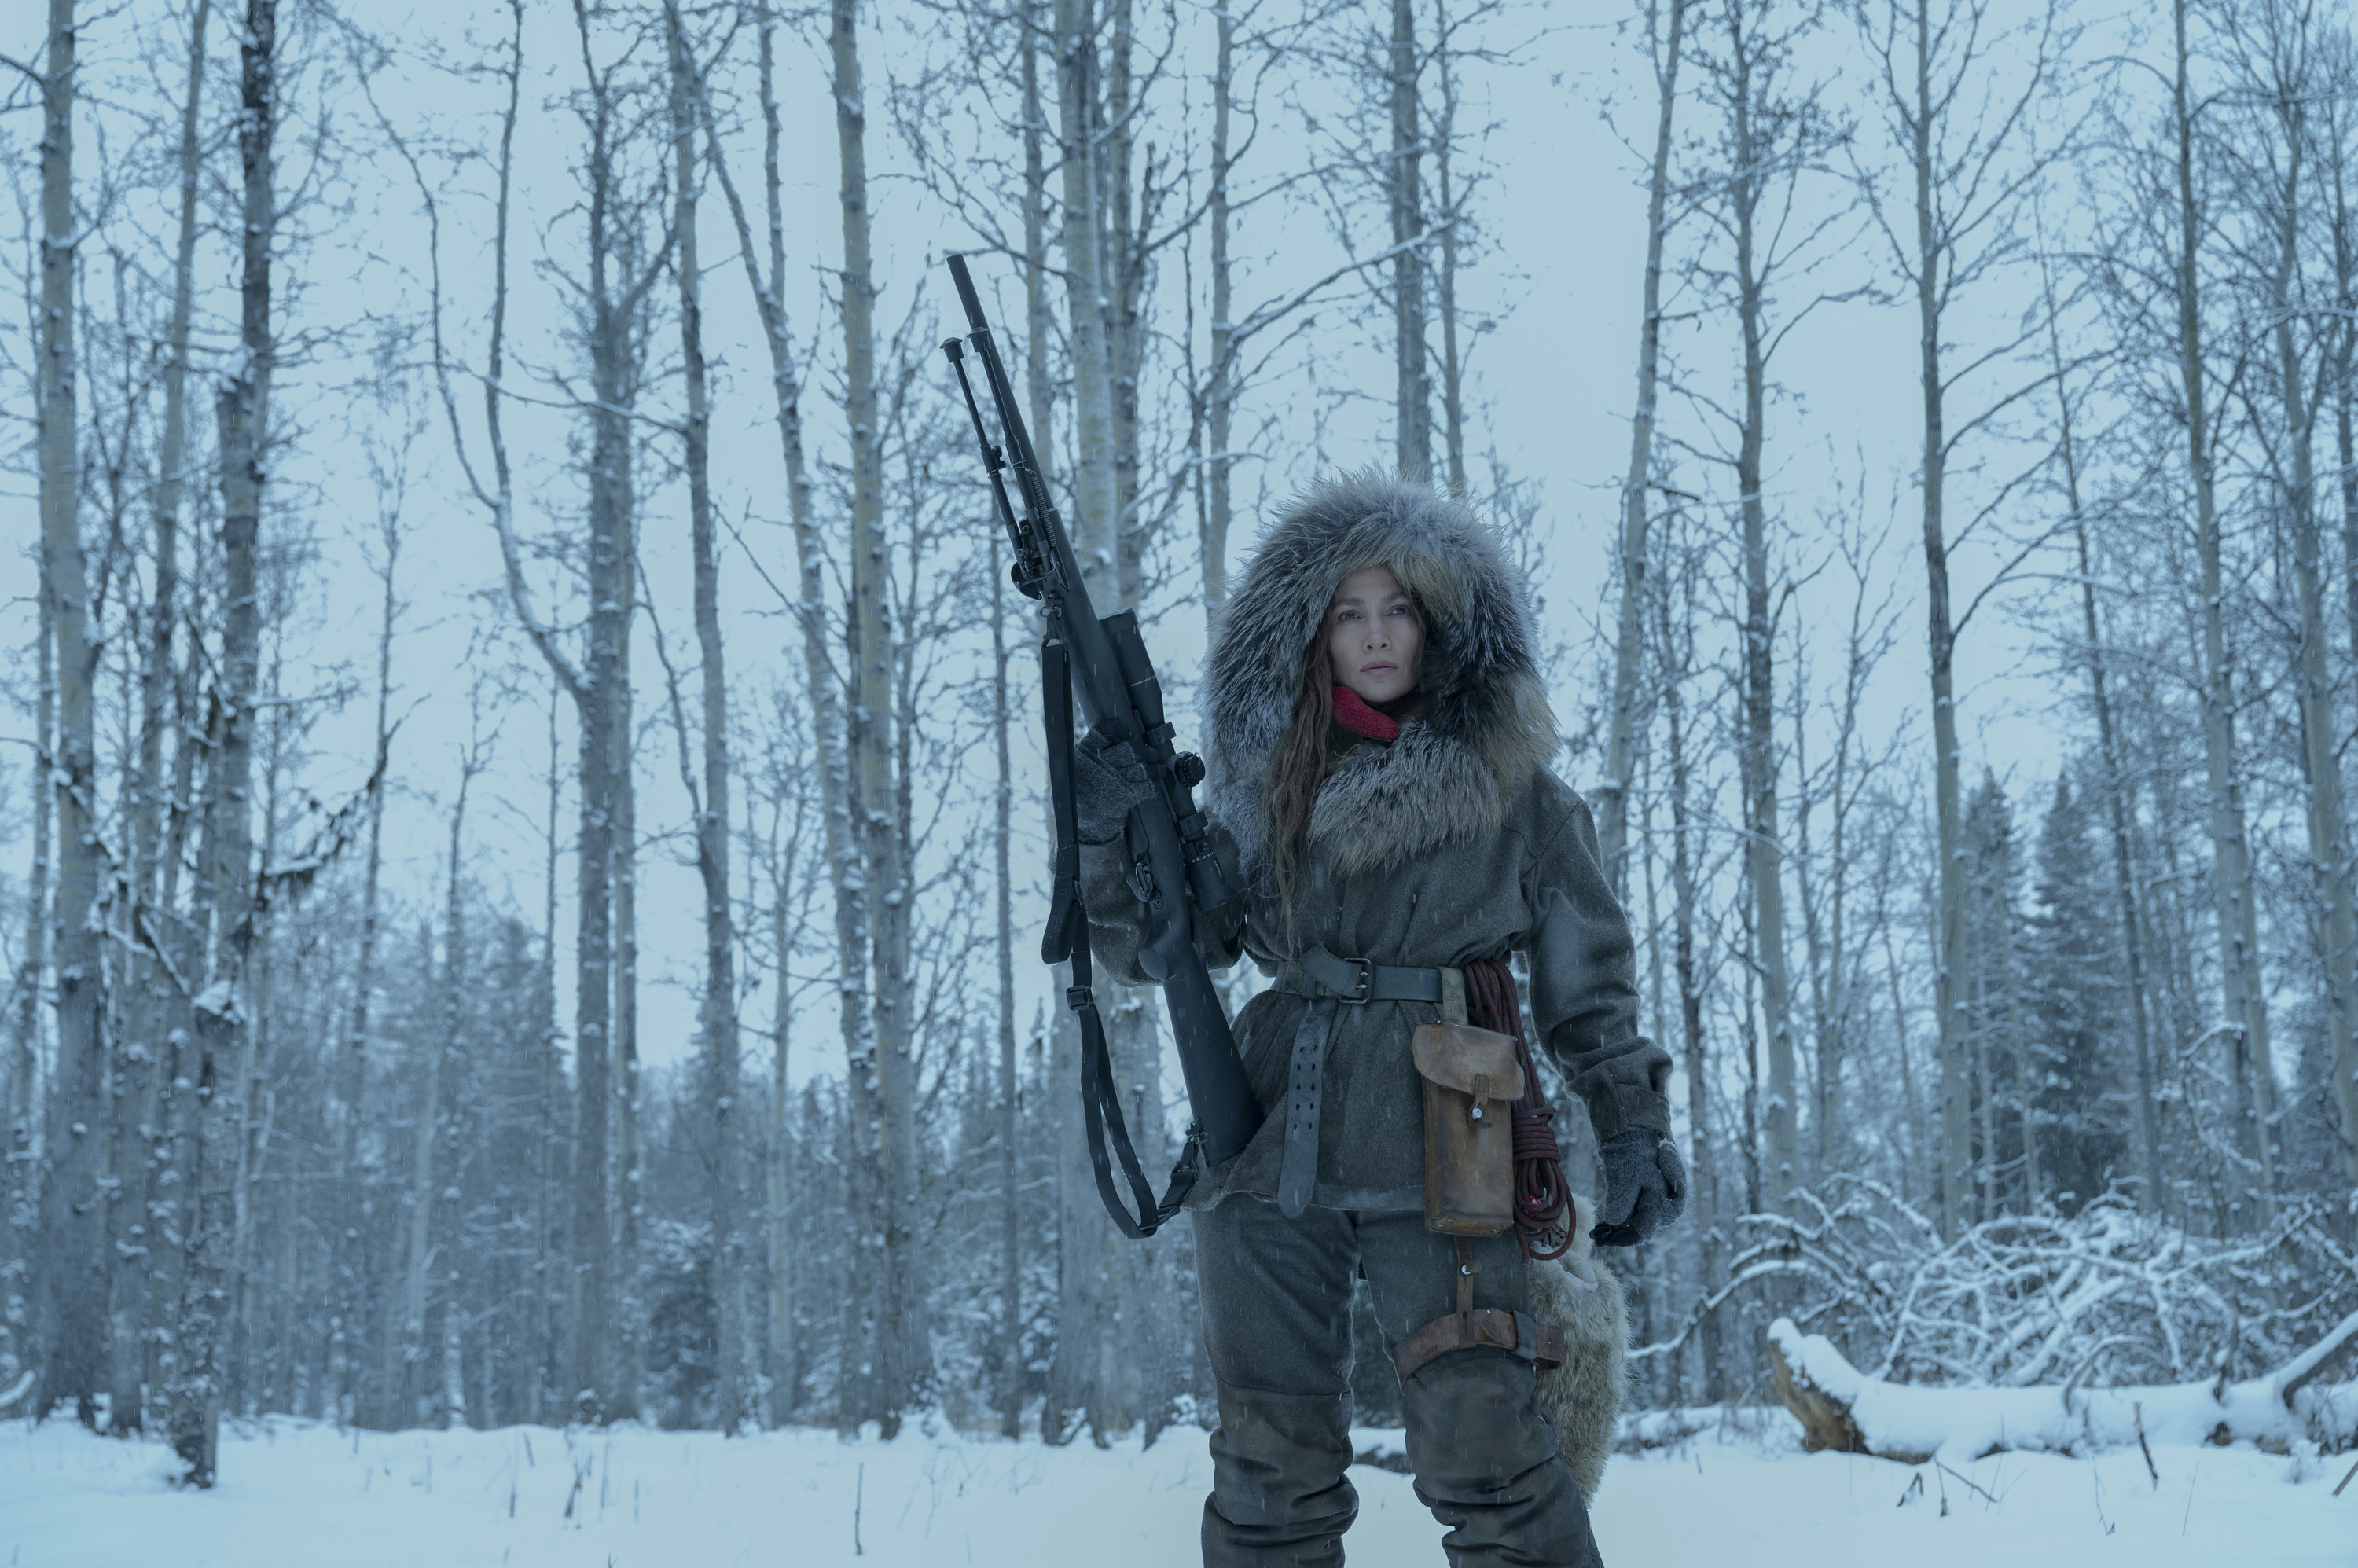 jennifer lopez holding a sniper rifle while standing in the cold wilderness in the mother